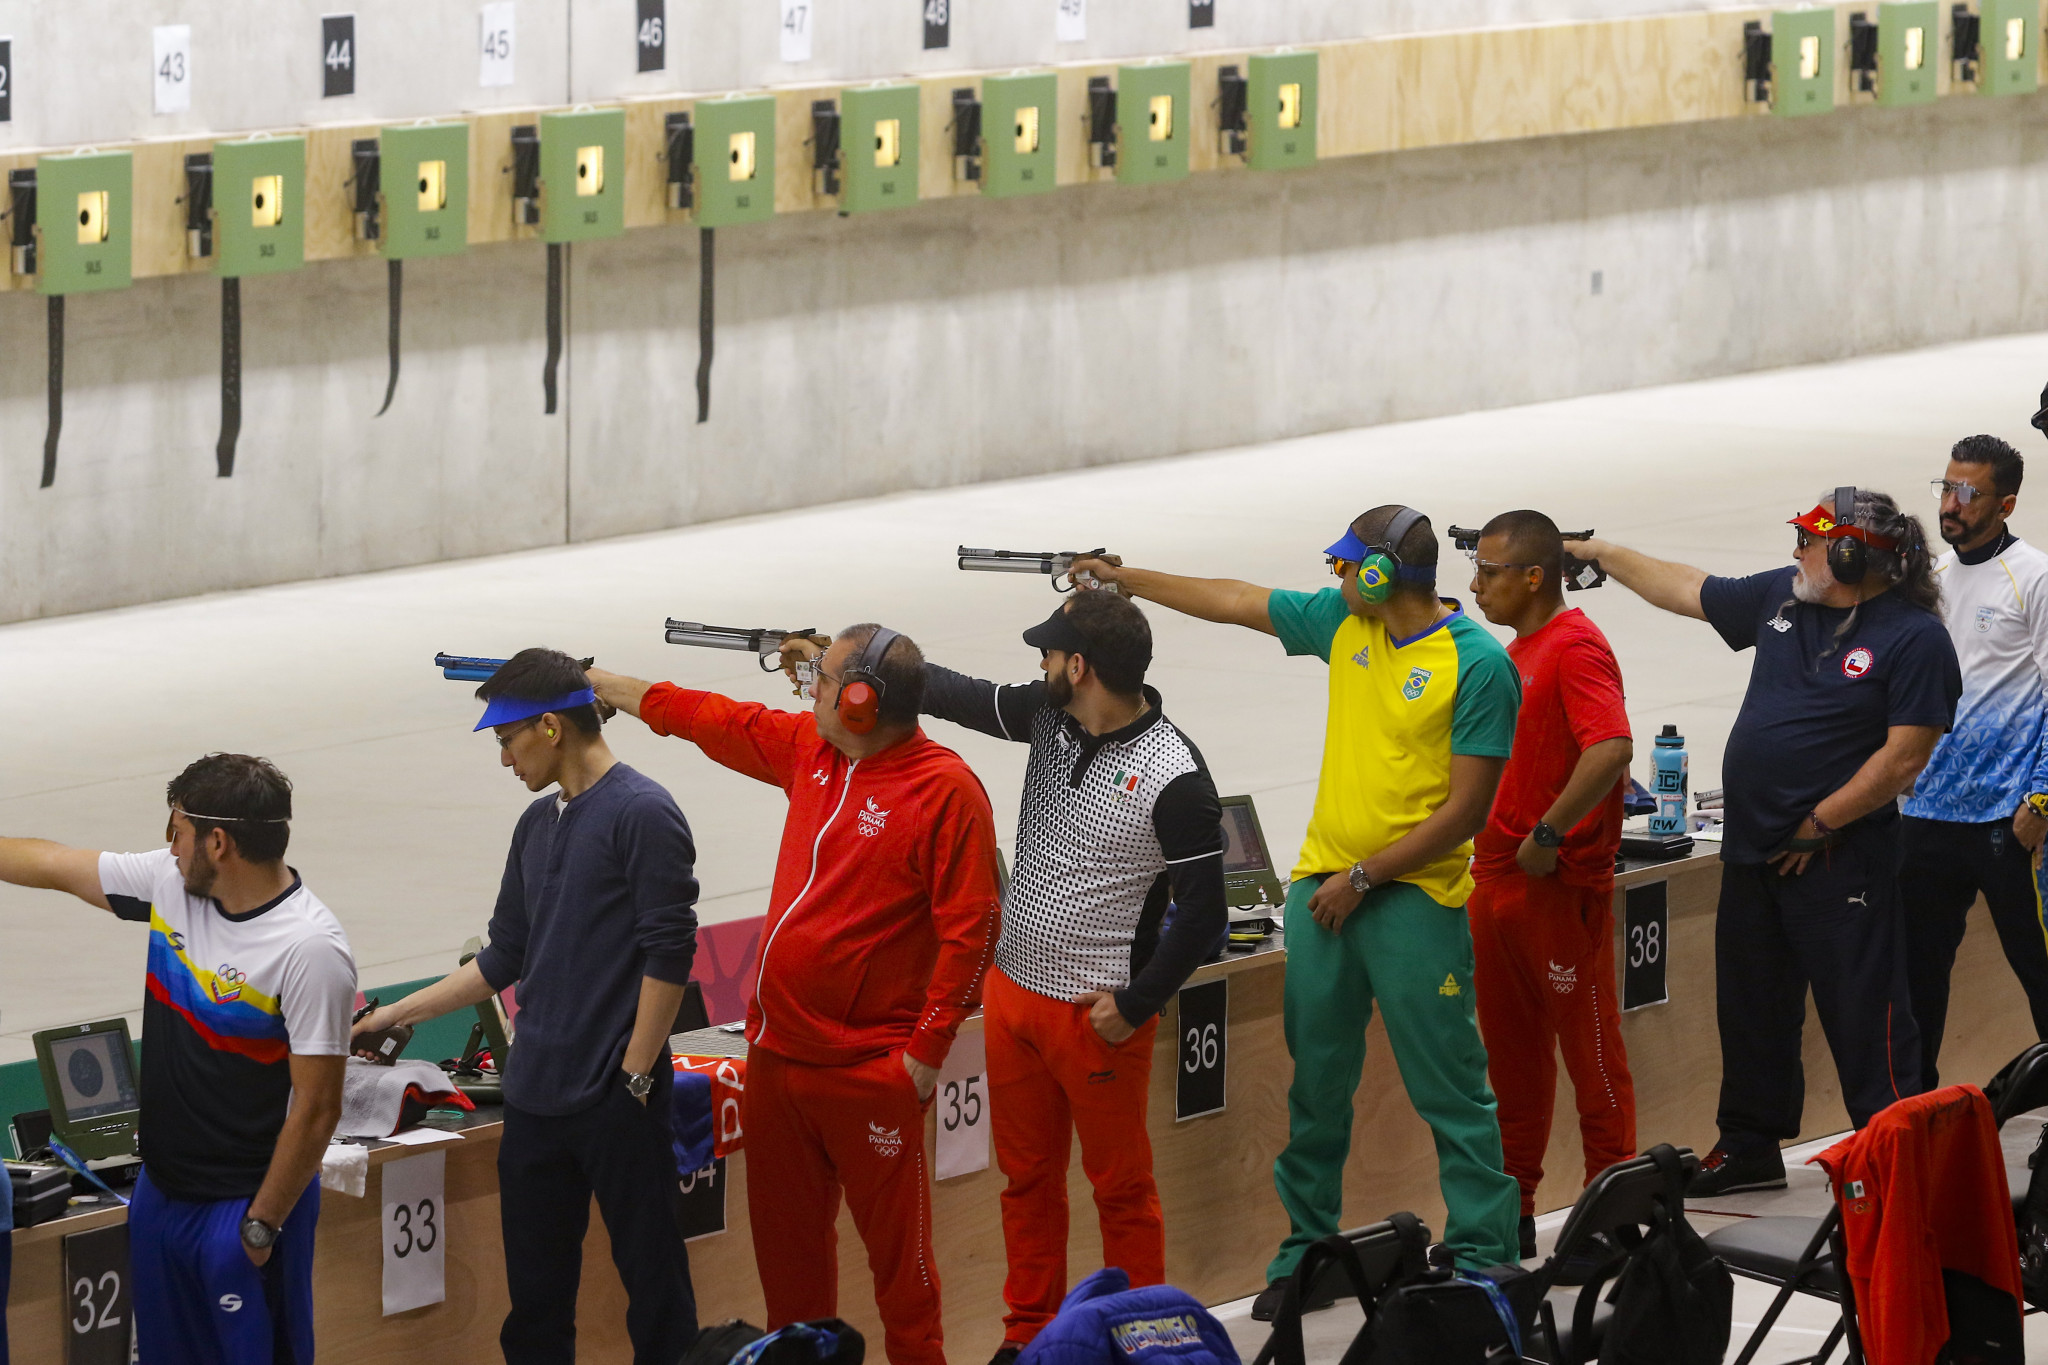 Shooting continued here, with medals awarded in the men's 10m air pistol ©Lima 2019